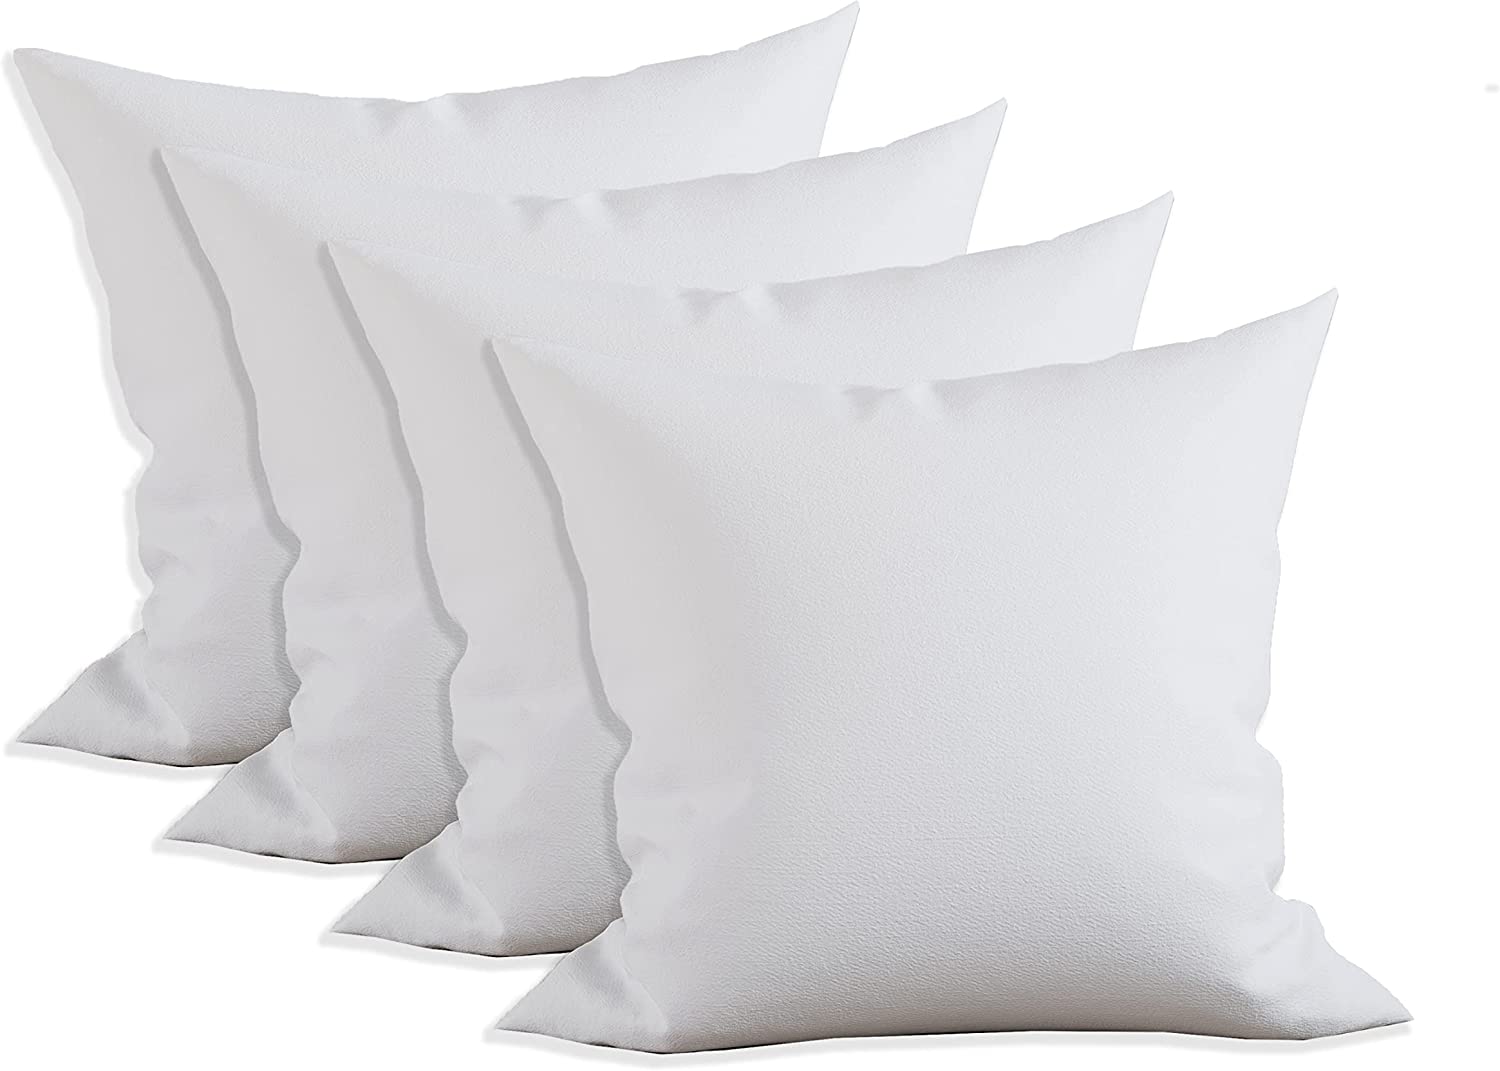 Elegant Comfort 16 x 16 Pillow Inserts - Set of 4 - Square Form Throw  Pillow Inserts with Poly-Cotton Shell and Siliconized Fiber Filling - Ideal  for